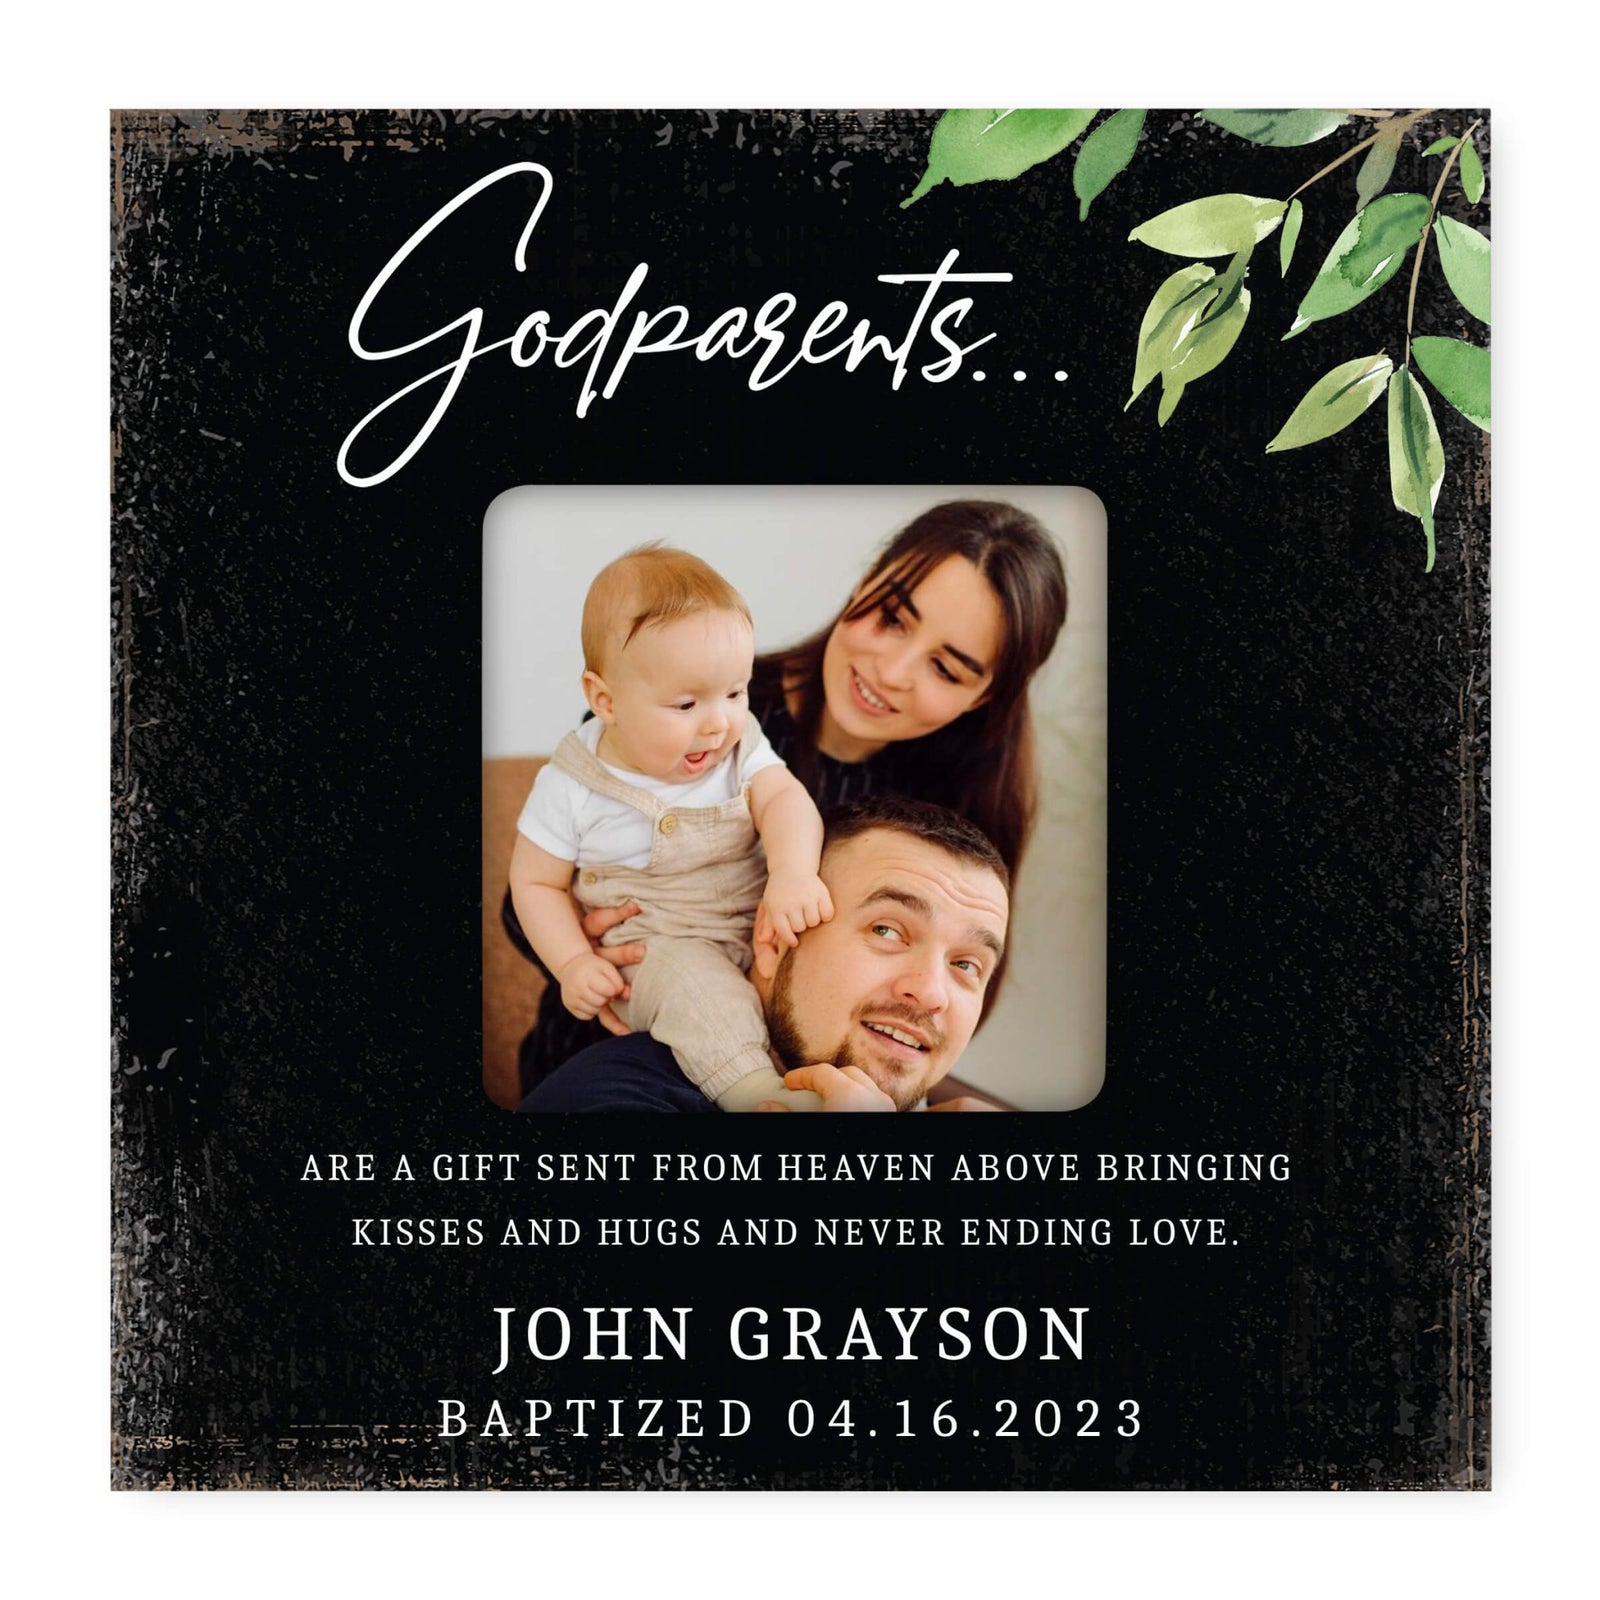 Personalized Wooden Picture Frame for Godparents - LifeSong Milestones